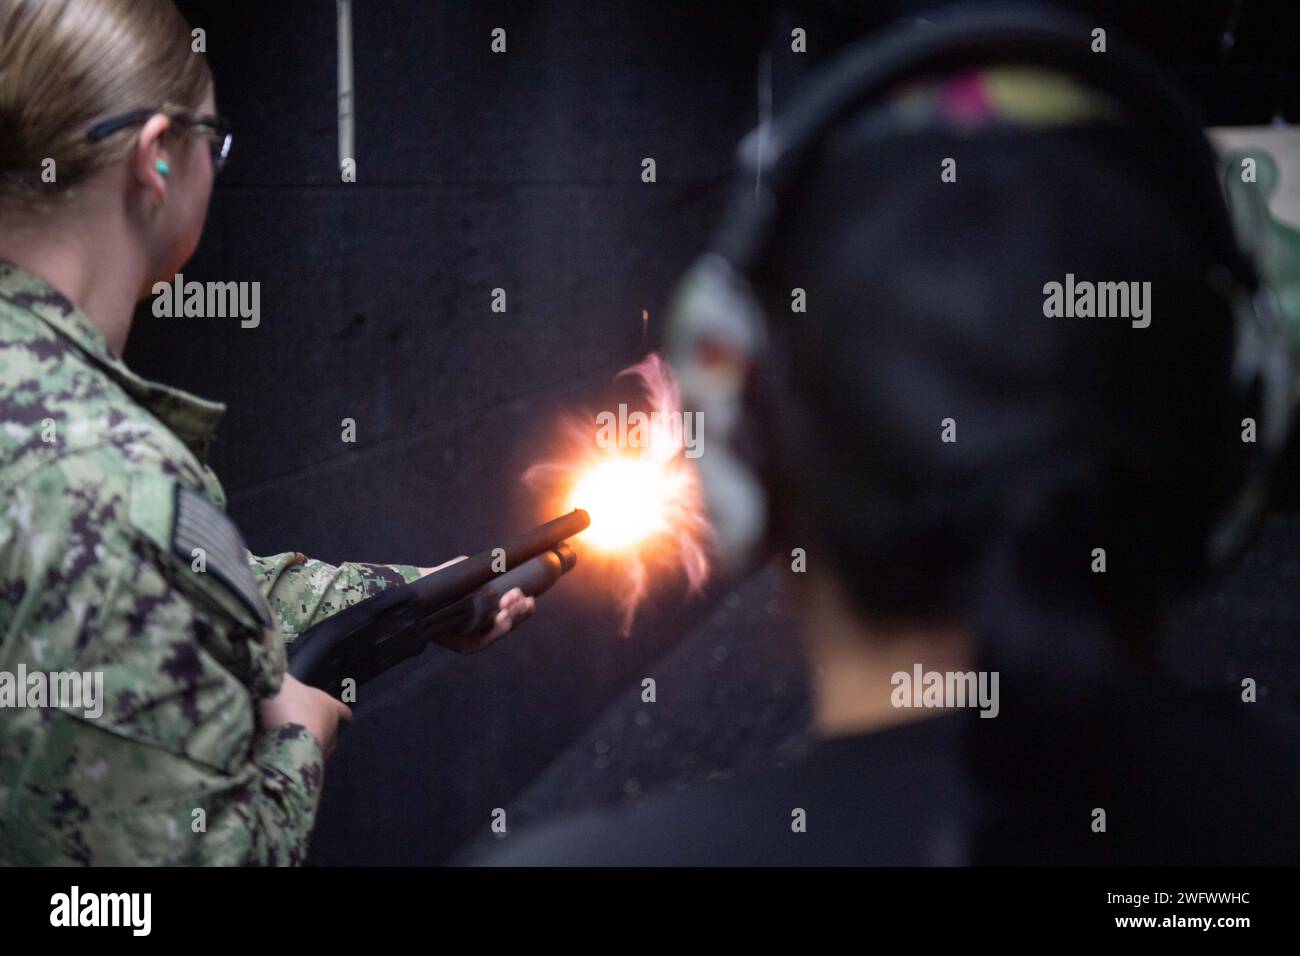 KEKAHA, Hawai‘i (Jan. 30, 2024) Boatswain's Mate Second Class Anna Henry fires an M500 service shotgun during gun qualification sustainment training at the indoor shooting range on Pacific Missile Range Facility (PMRF), Barking Sands, Kekaha, Hawaii. PMRF is the world's largest instrumented multi-domain range, capable of supporting surface, subsurface, air, and space operations simultaneously. Stock Photo